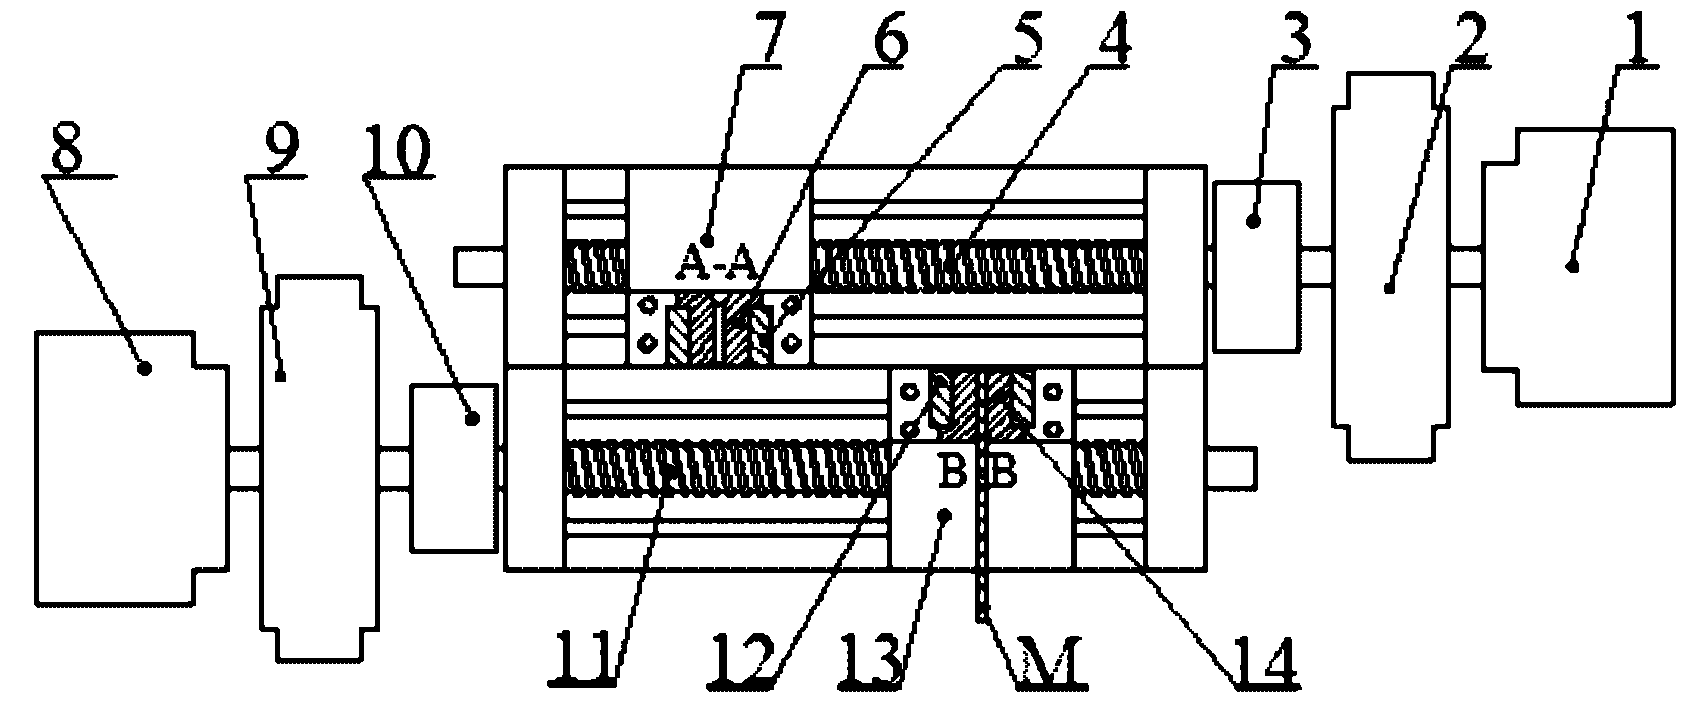 Opposite-cutting type blanking machine for driving linear motion of double screw rods by AC (Alternating Current) servo motor